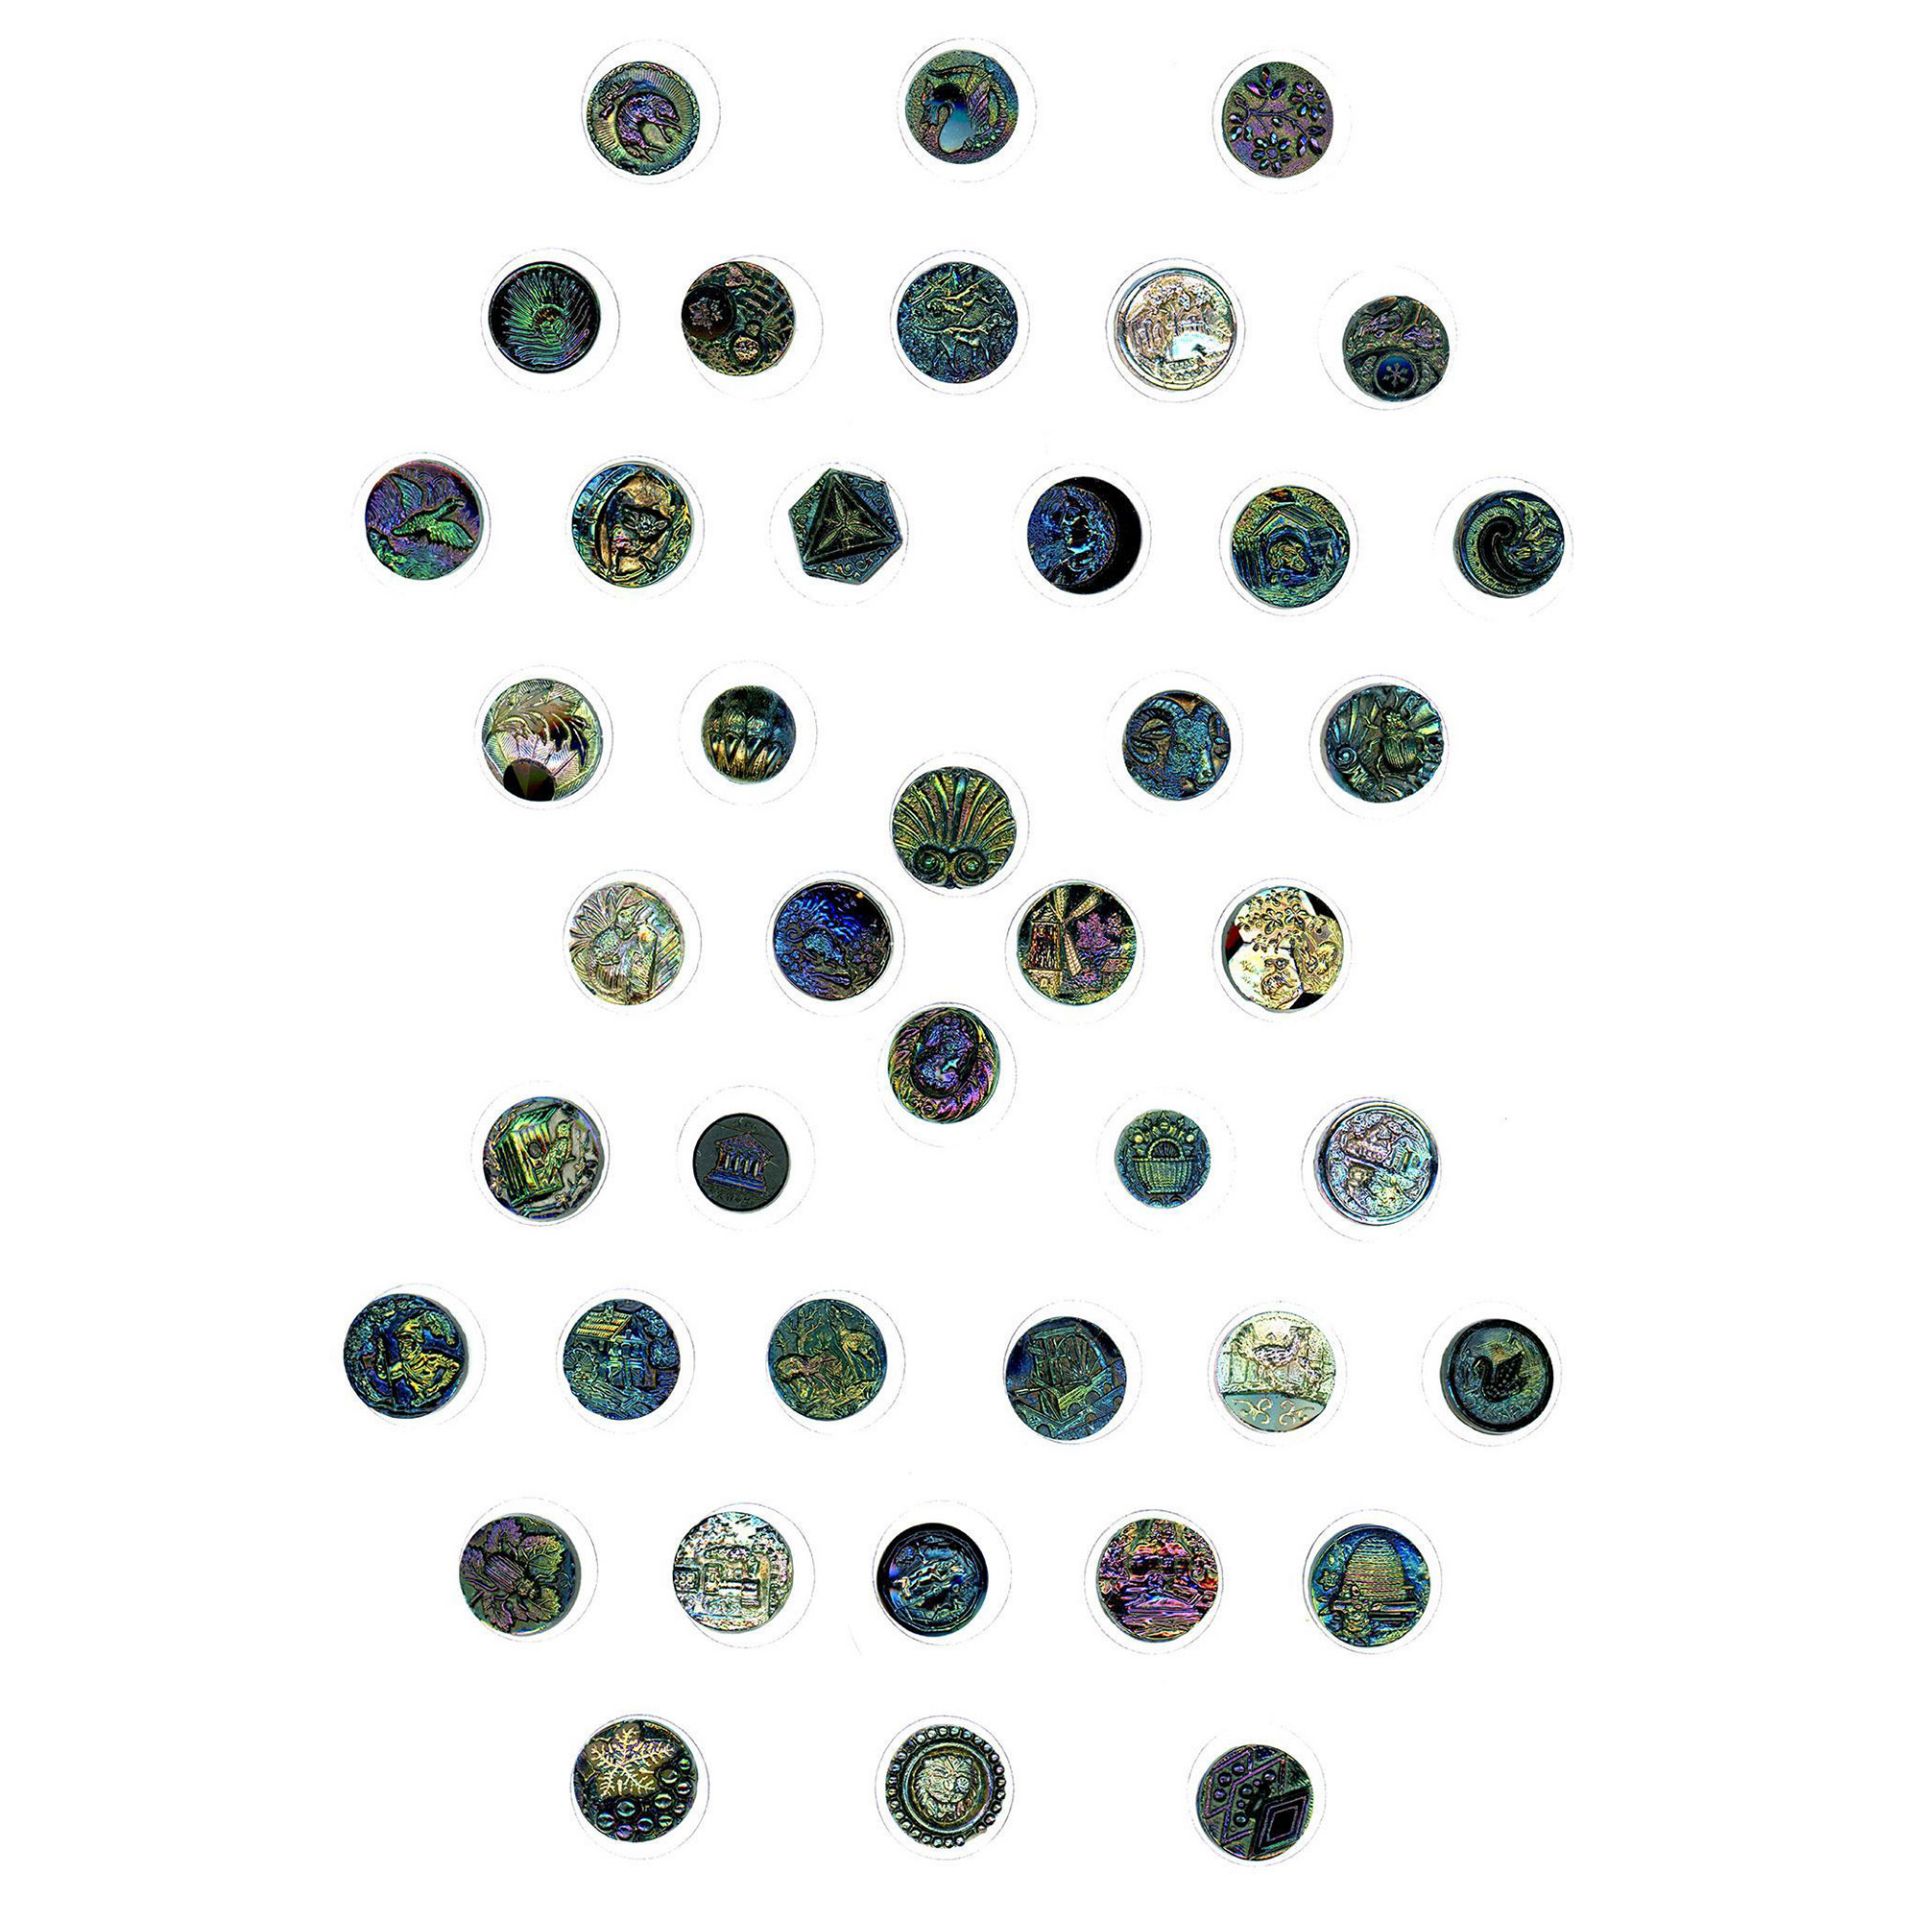 A card of division one pictorial black glass buttons